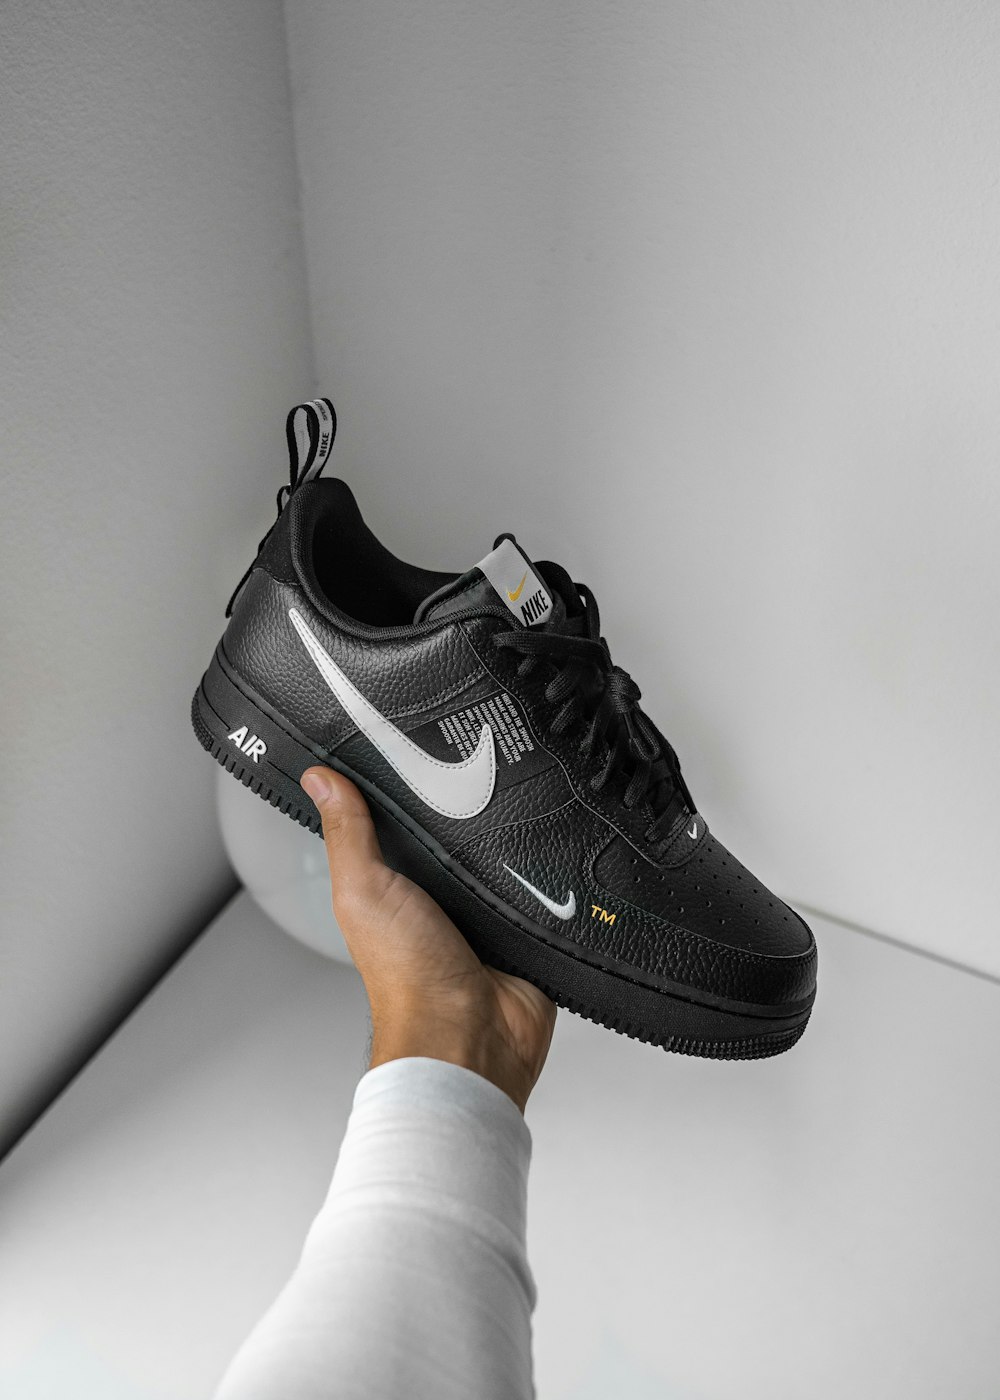 Black and white Nike Air Force 1 sneaker photo – Free Shoe Image on Unsplash